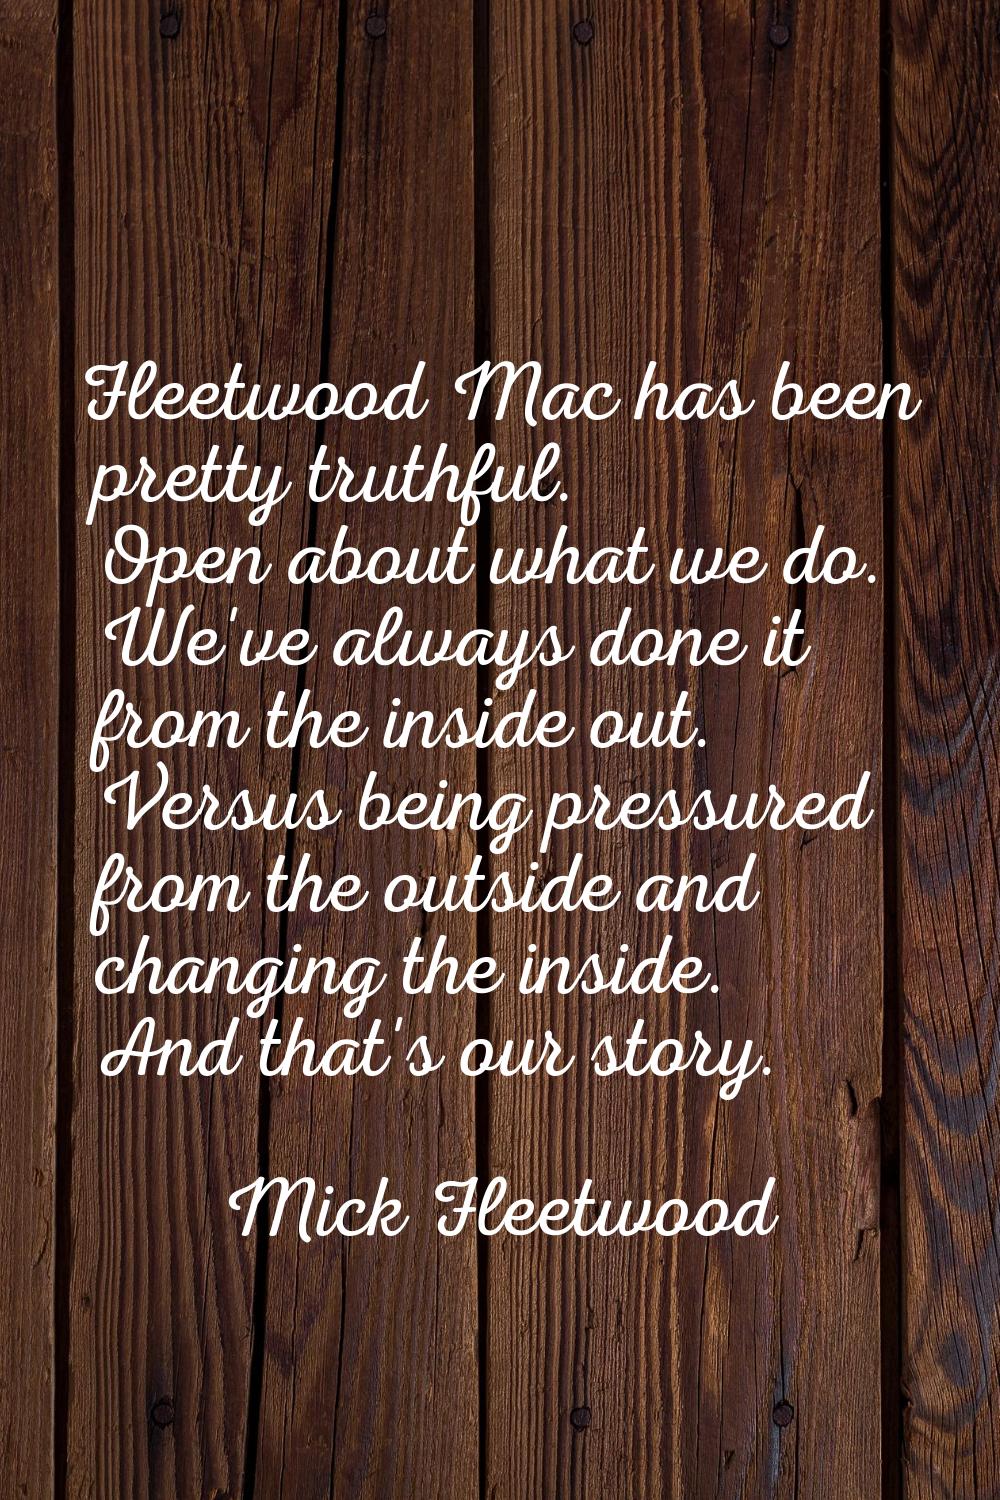 Fleetwood Mac has been pretty truthful. Open about what we do. We've always done it from the inside